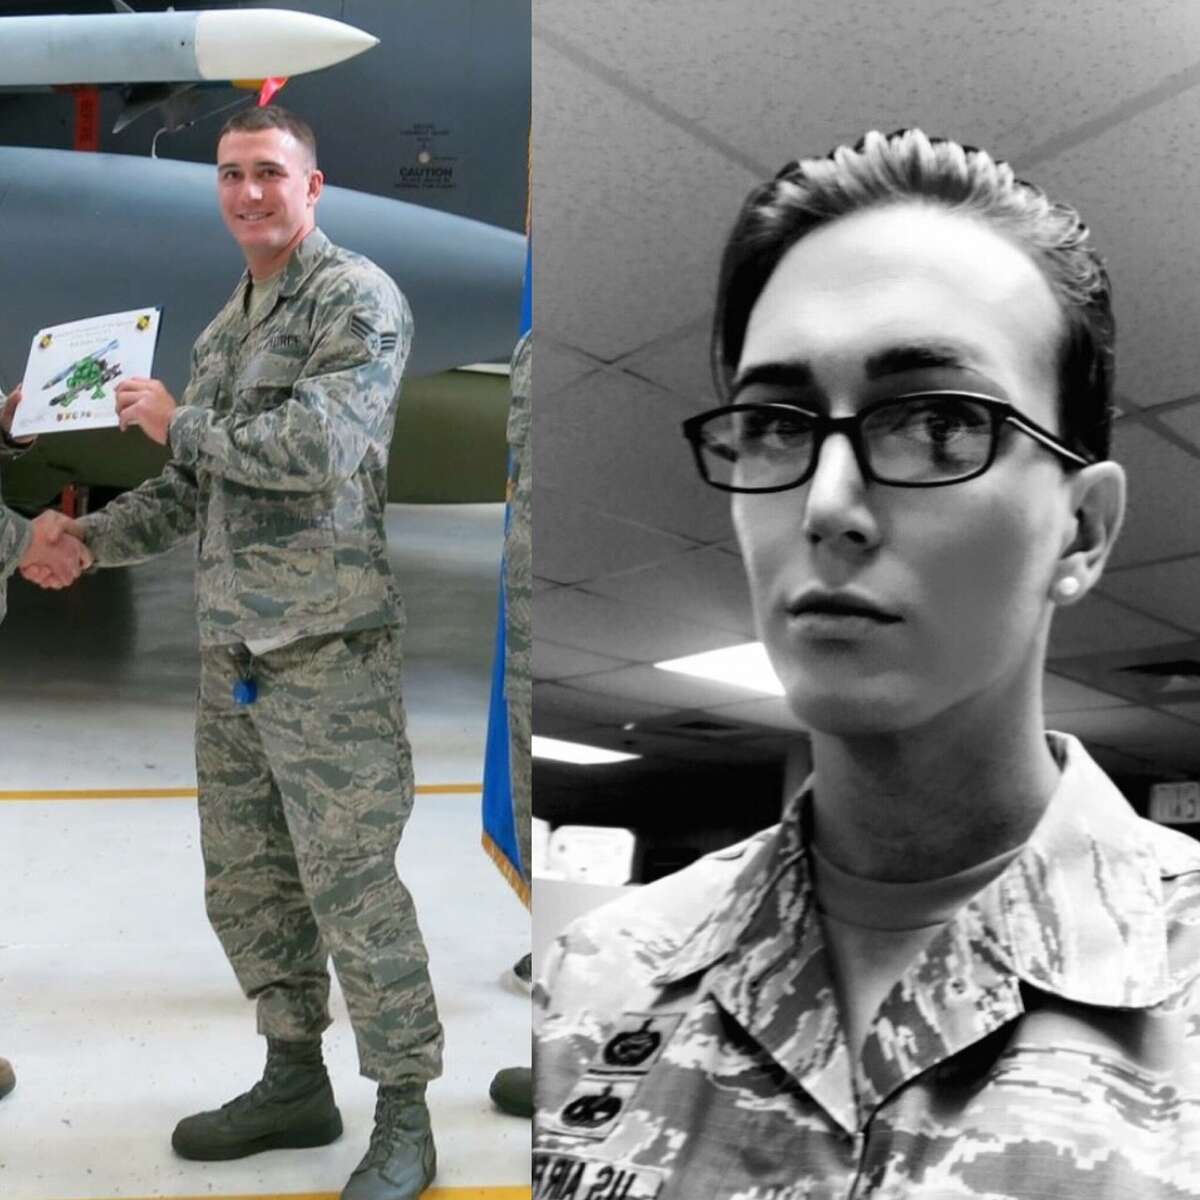 Jamie Hash is a transgender member of the Air Force stationed at Randolph Air Force Base. She entered the Air Force as a man, left, and has spent the past year living and working as a woman. 